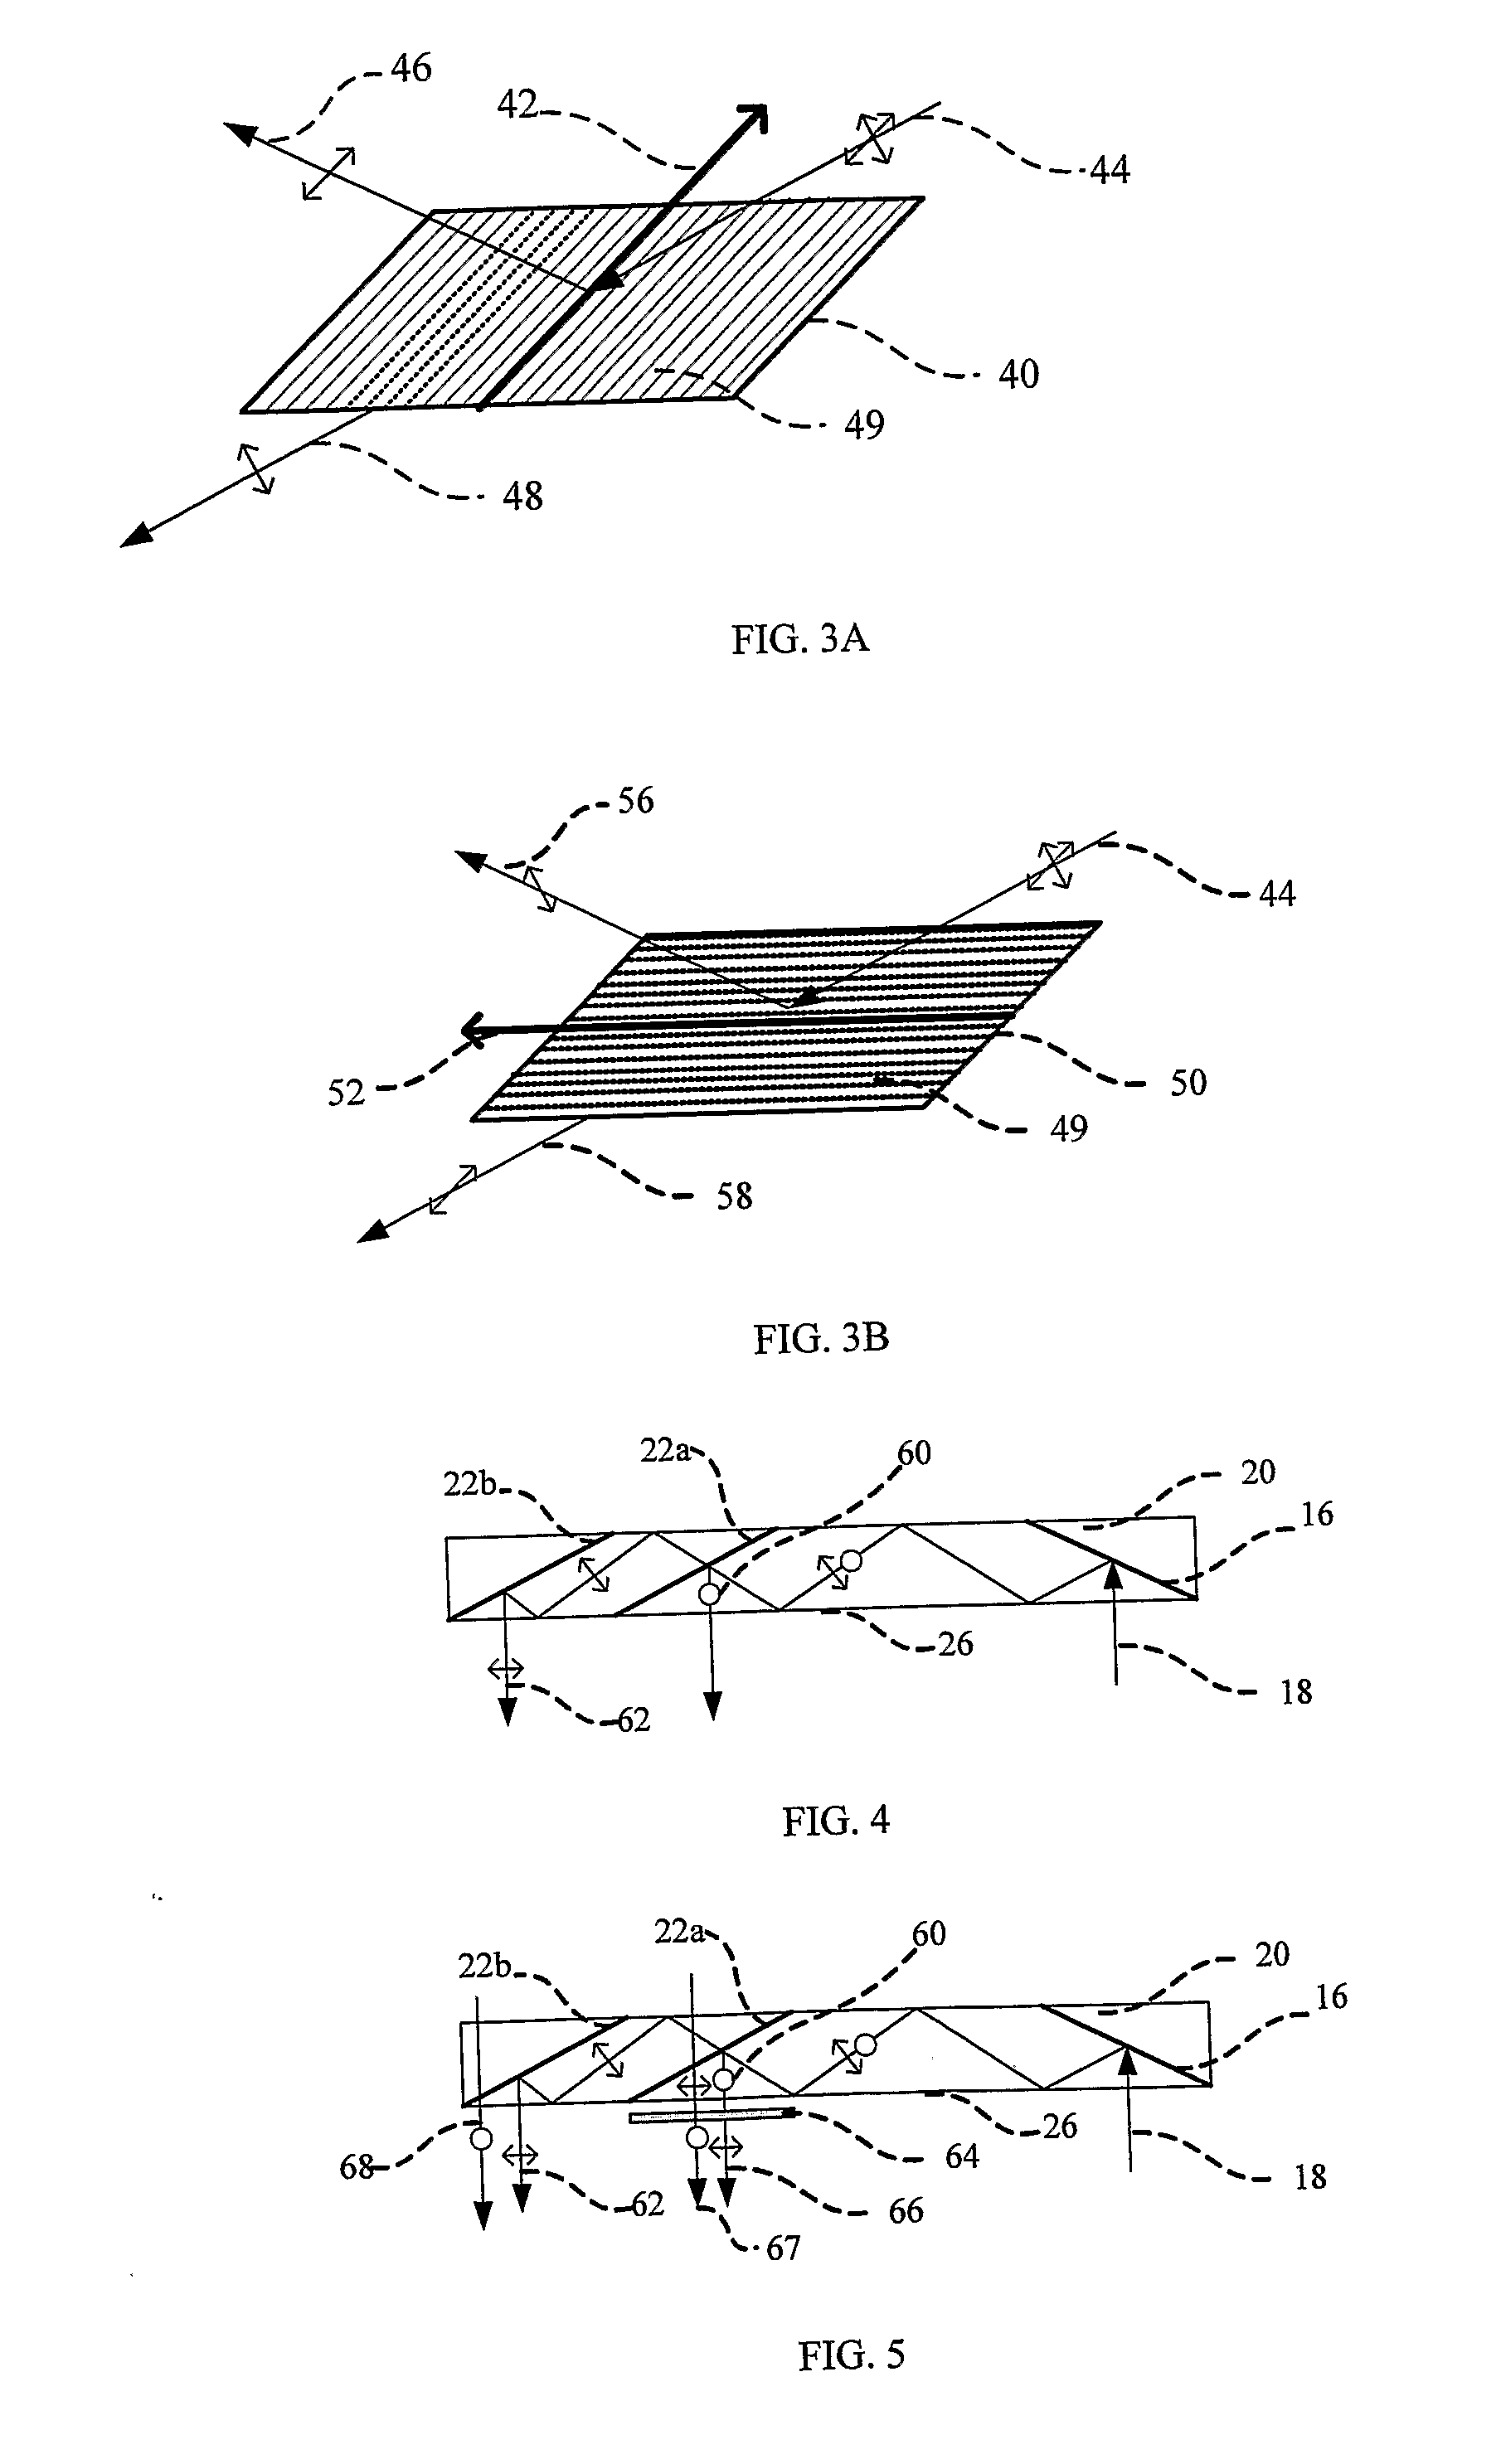 Substrate-Guide Optical Device Utilizing Polarization Beam Splitters